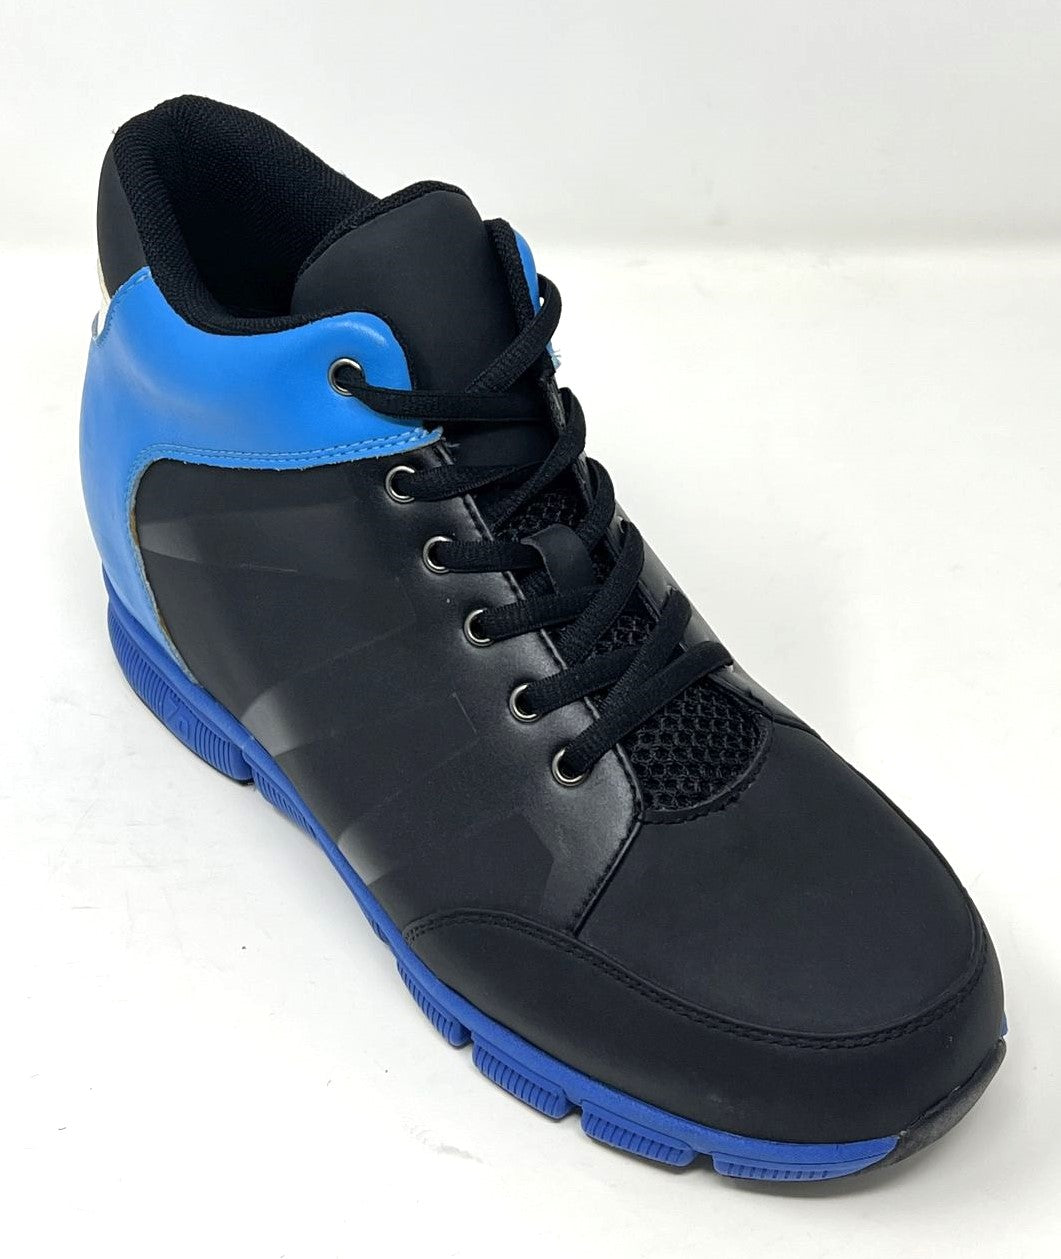 FSI0109 - 3.2 Inches Taller (Black/Blue) - Size 7.5 Only